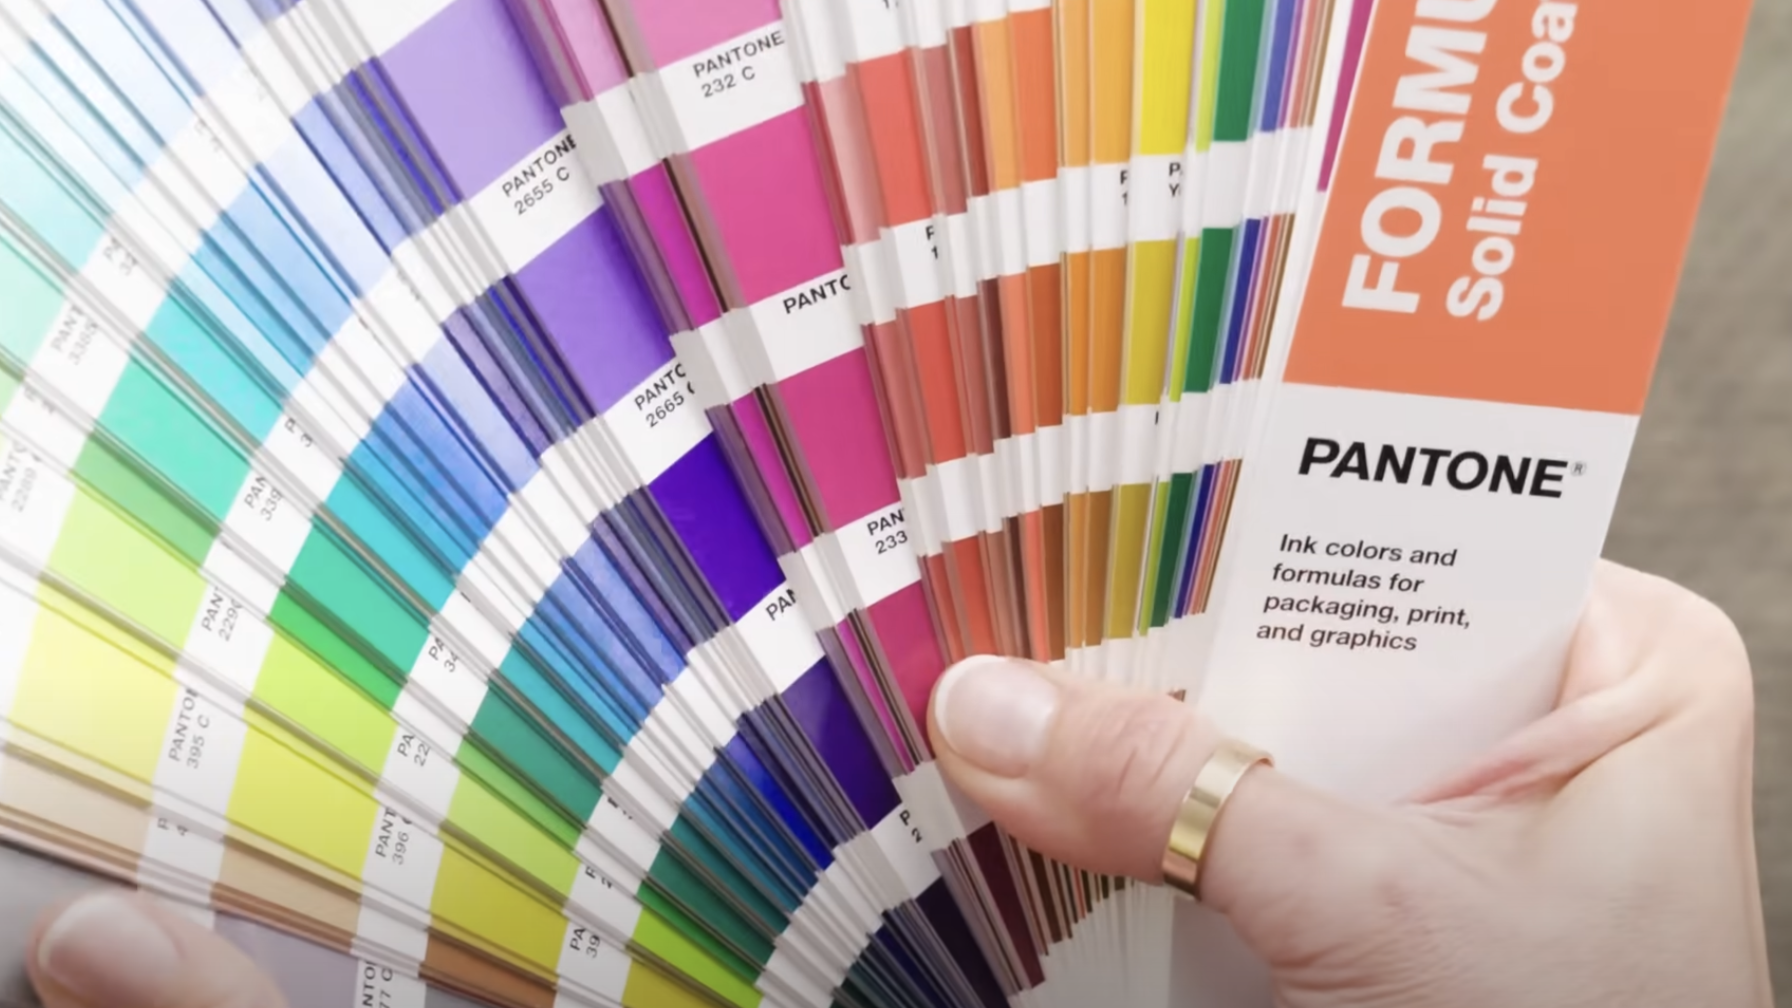 swatchbook, inc., announced the integration with the global authority on  color, Pantone.